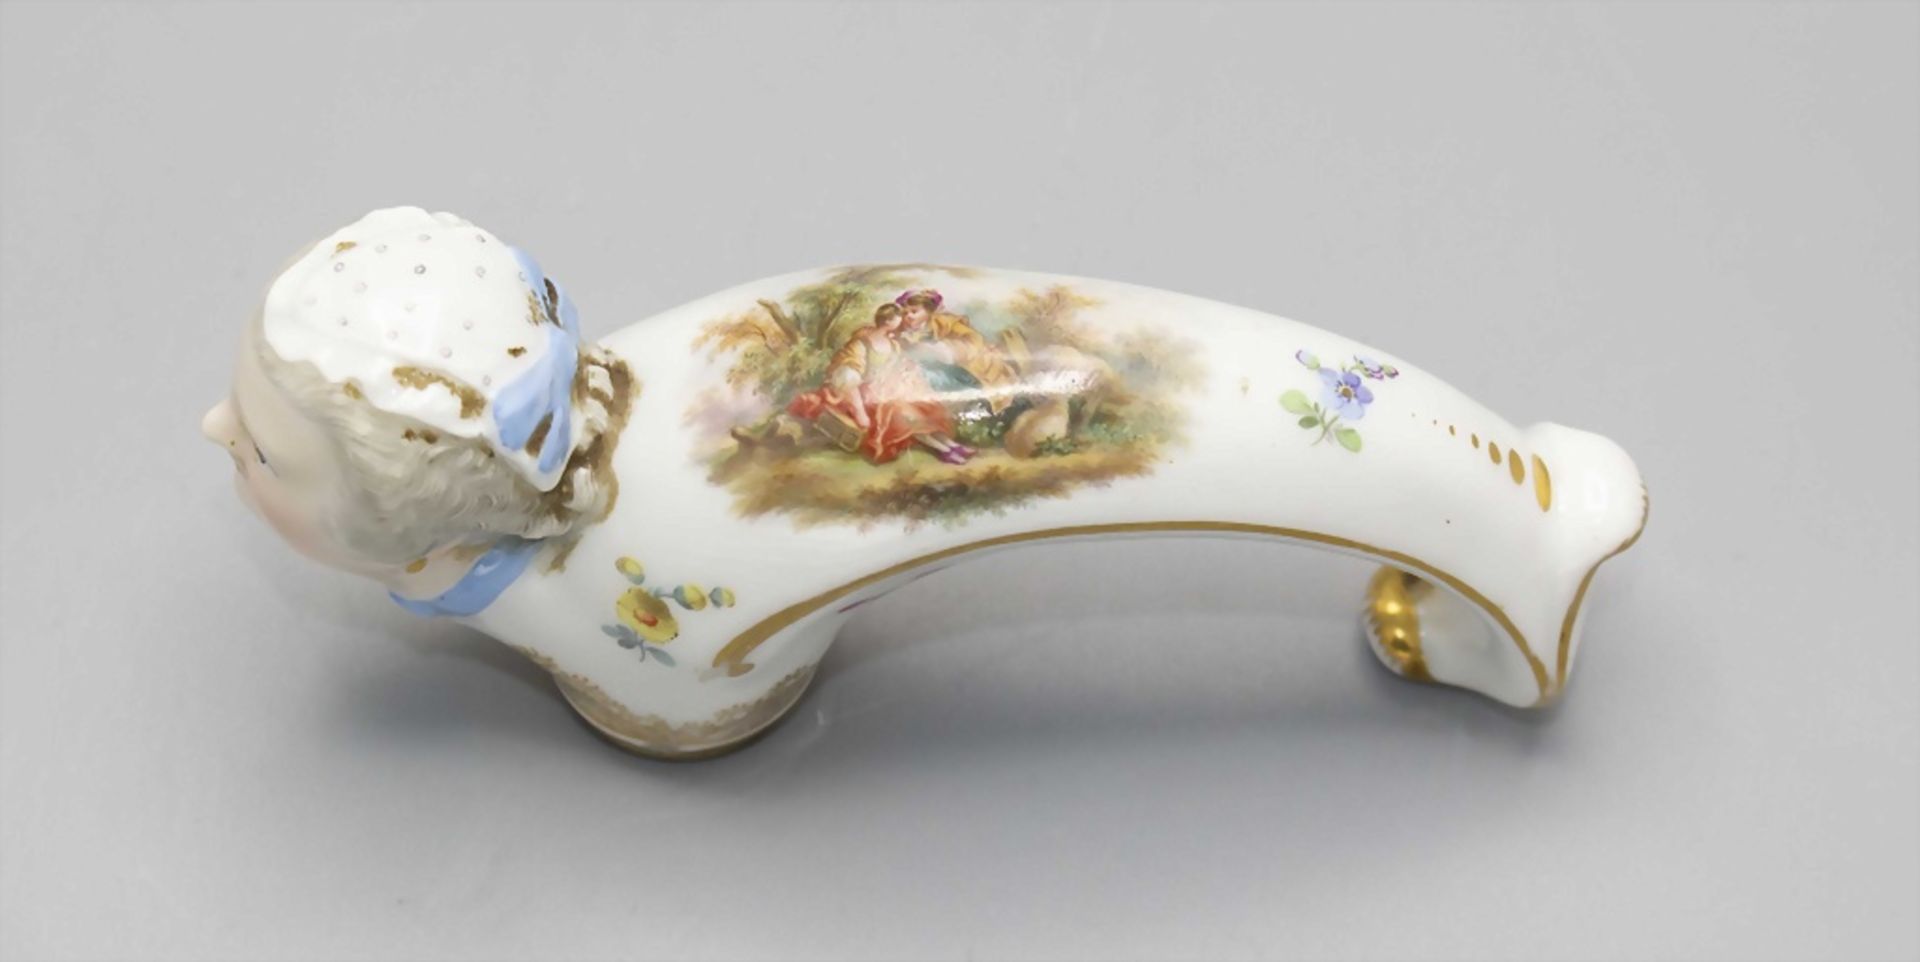 Stockgriff mit Frauenkopf und Watteau-Szene / A cane handle with the head of a woman and a ... - Image 6 of 6